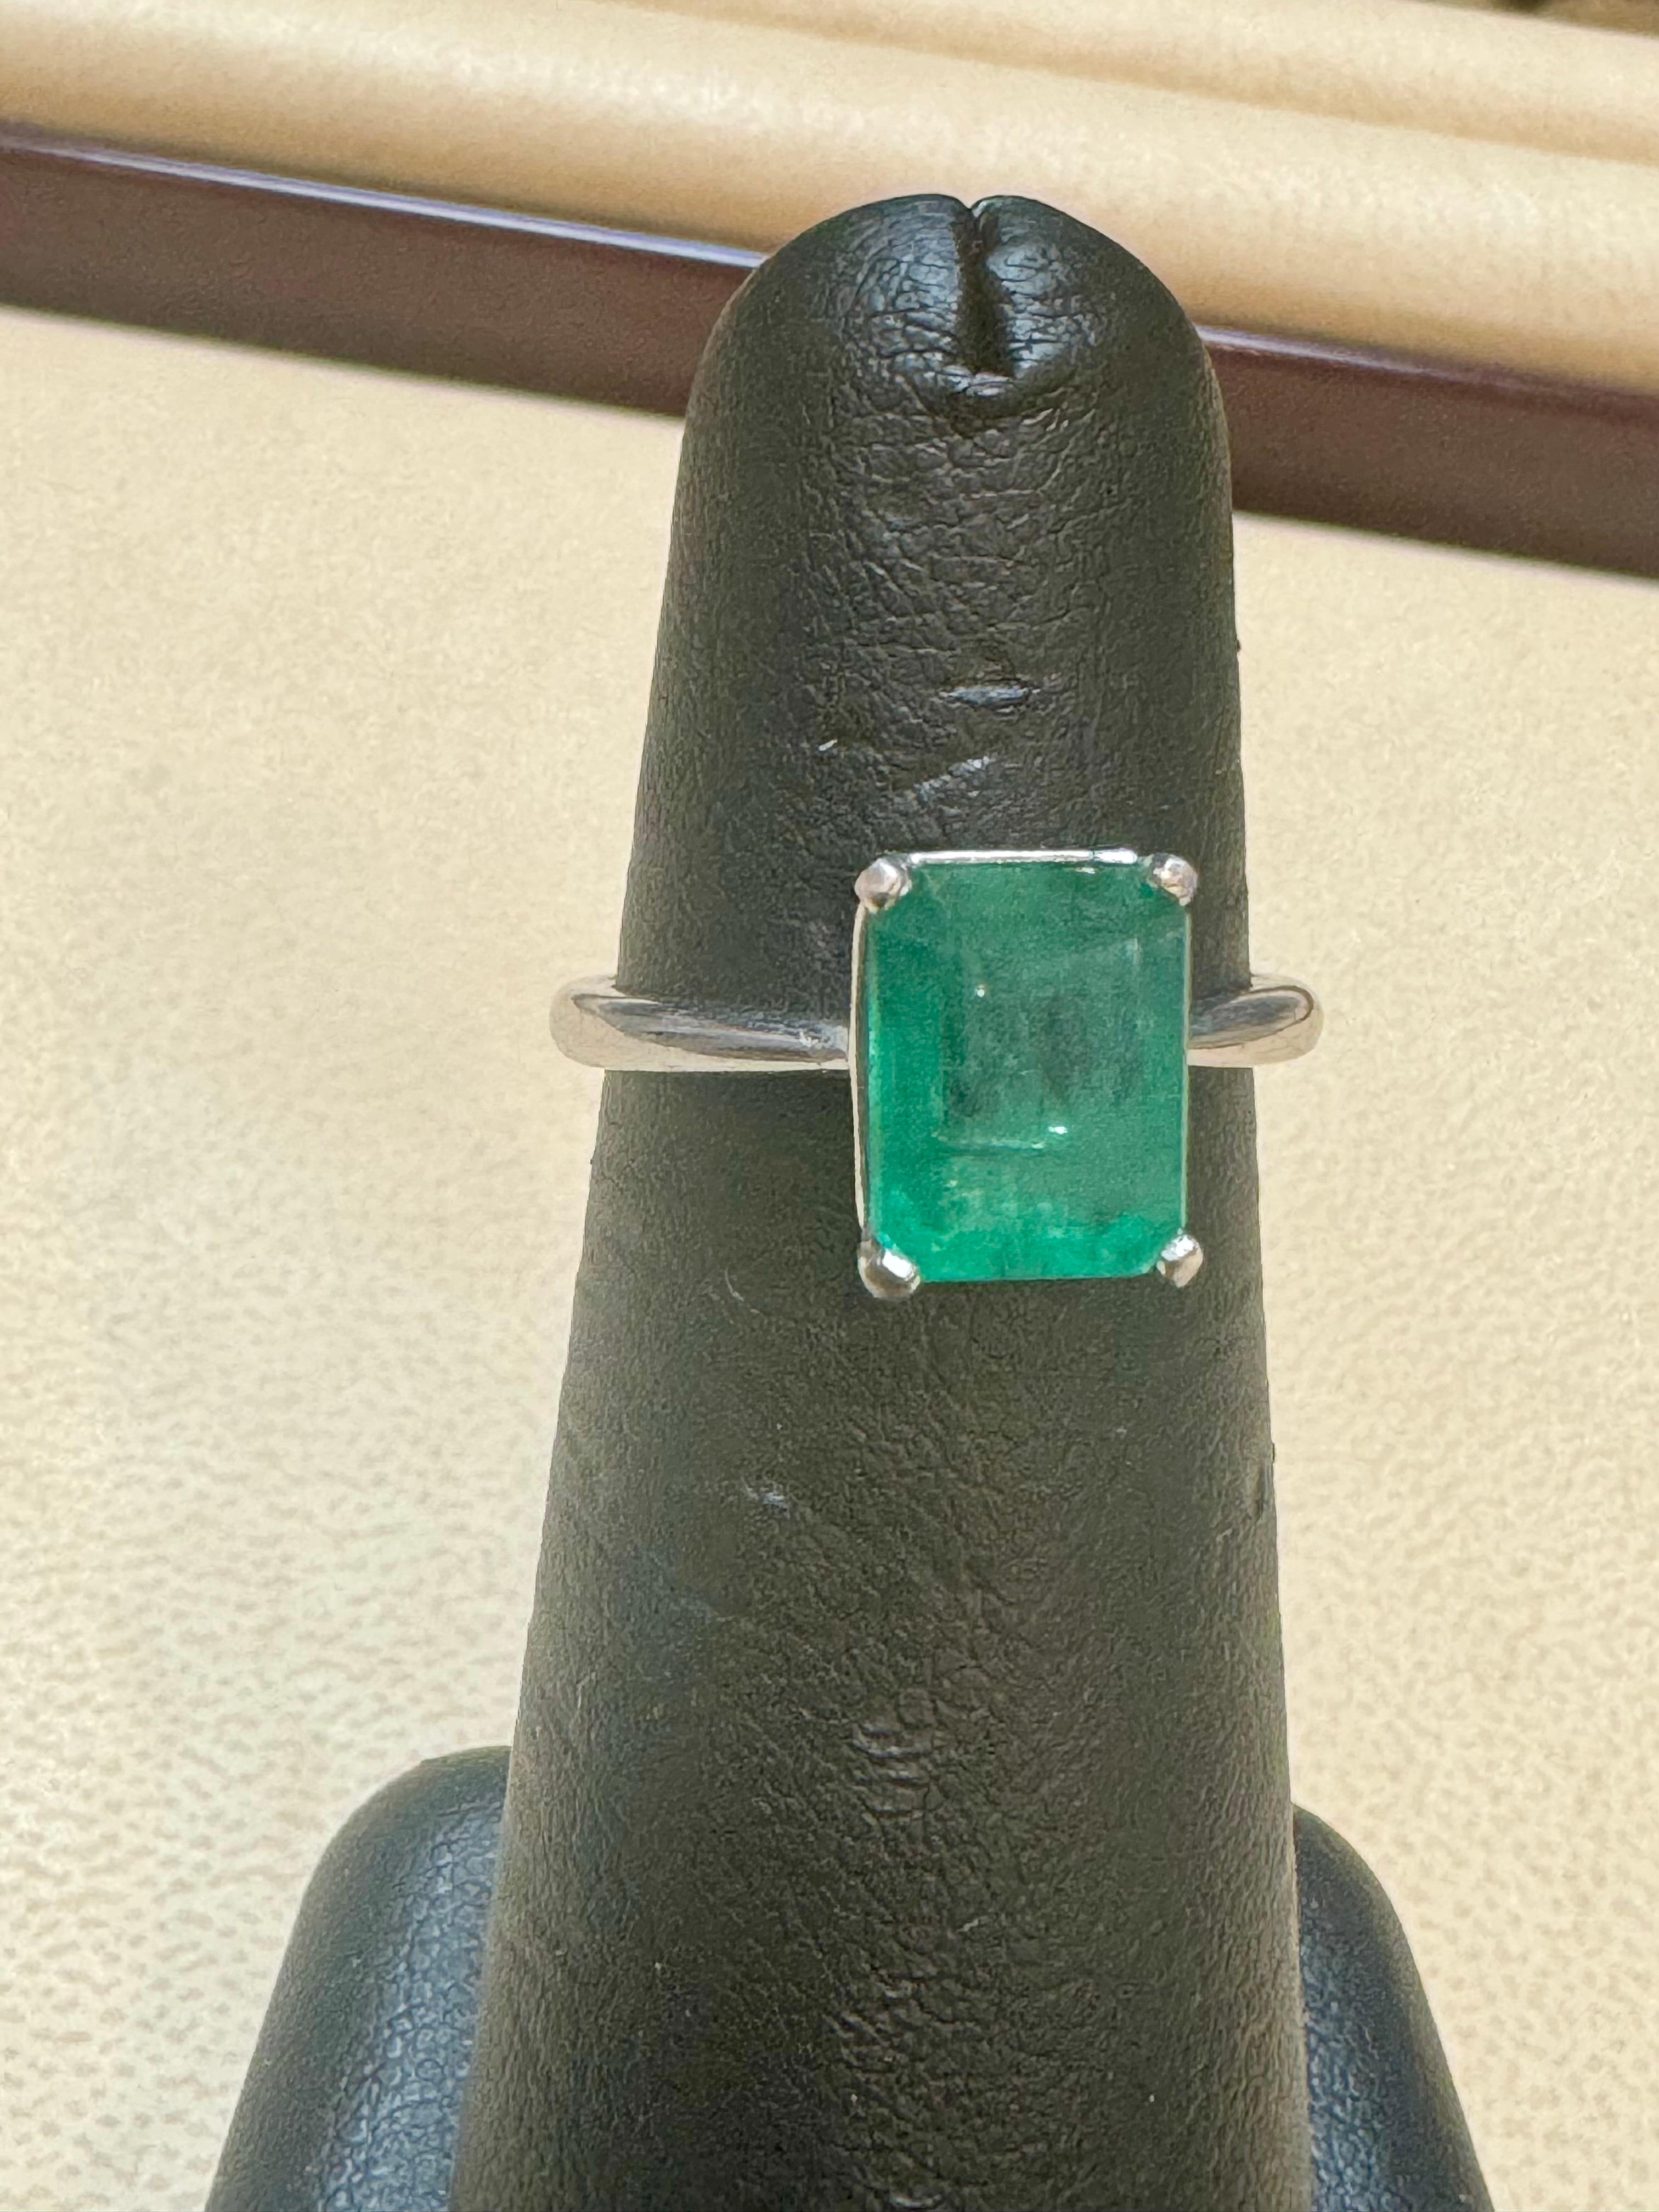 Natural 2.2 Carat Emerald Cut Zambian Emerald Ring in Platinum, Estate, Size 5.5 In Excellent Condition For Sale In New York, NY